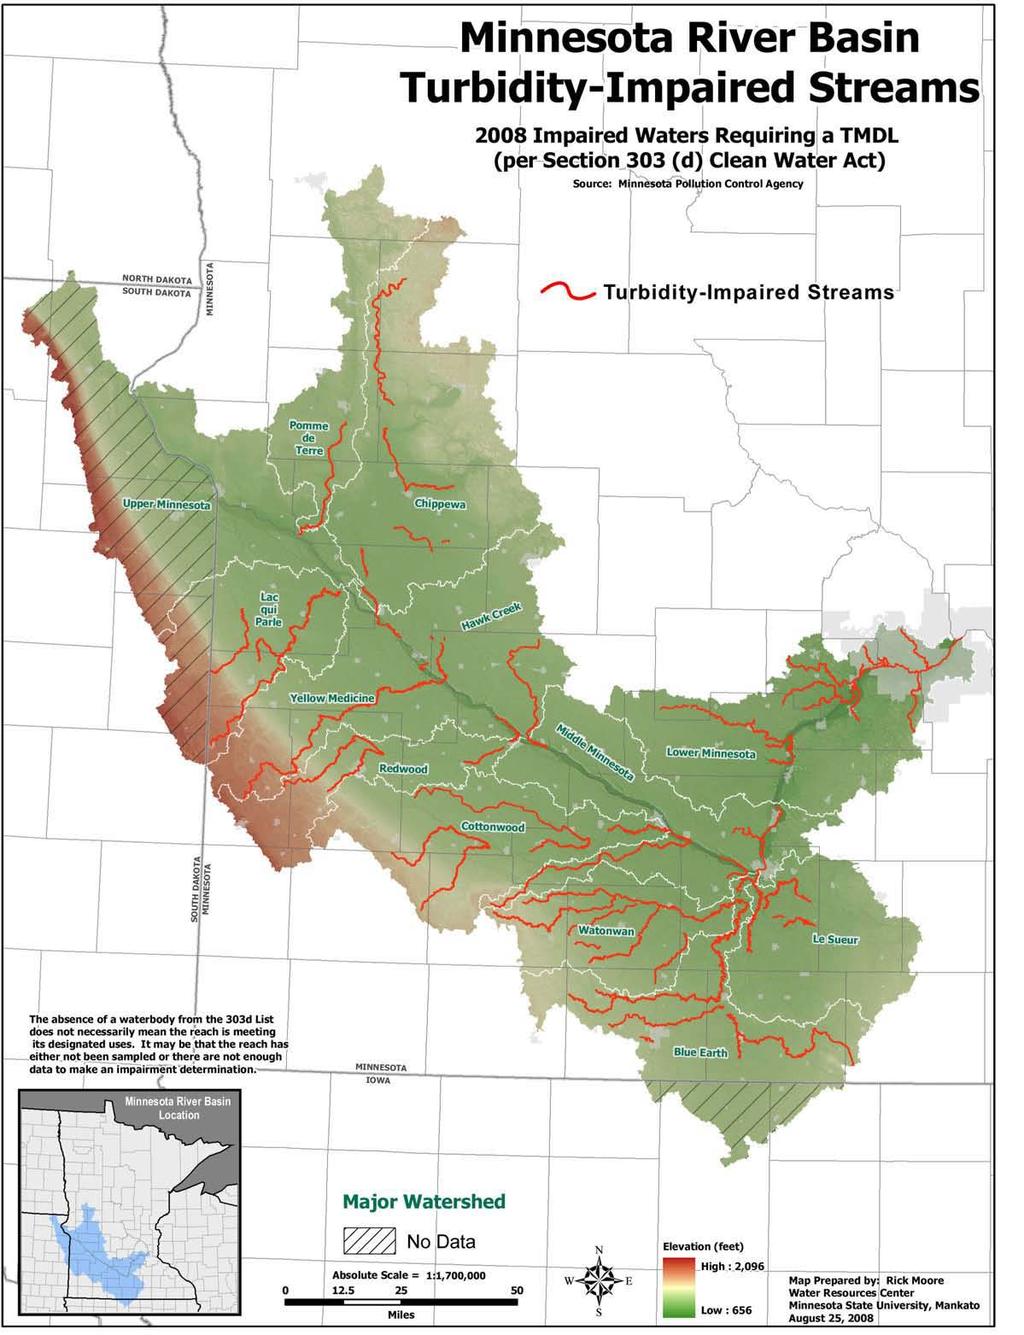 The Minnesota River Basin Turbidity-Impaired Streams map above shows assessed water bodies that do